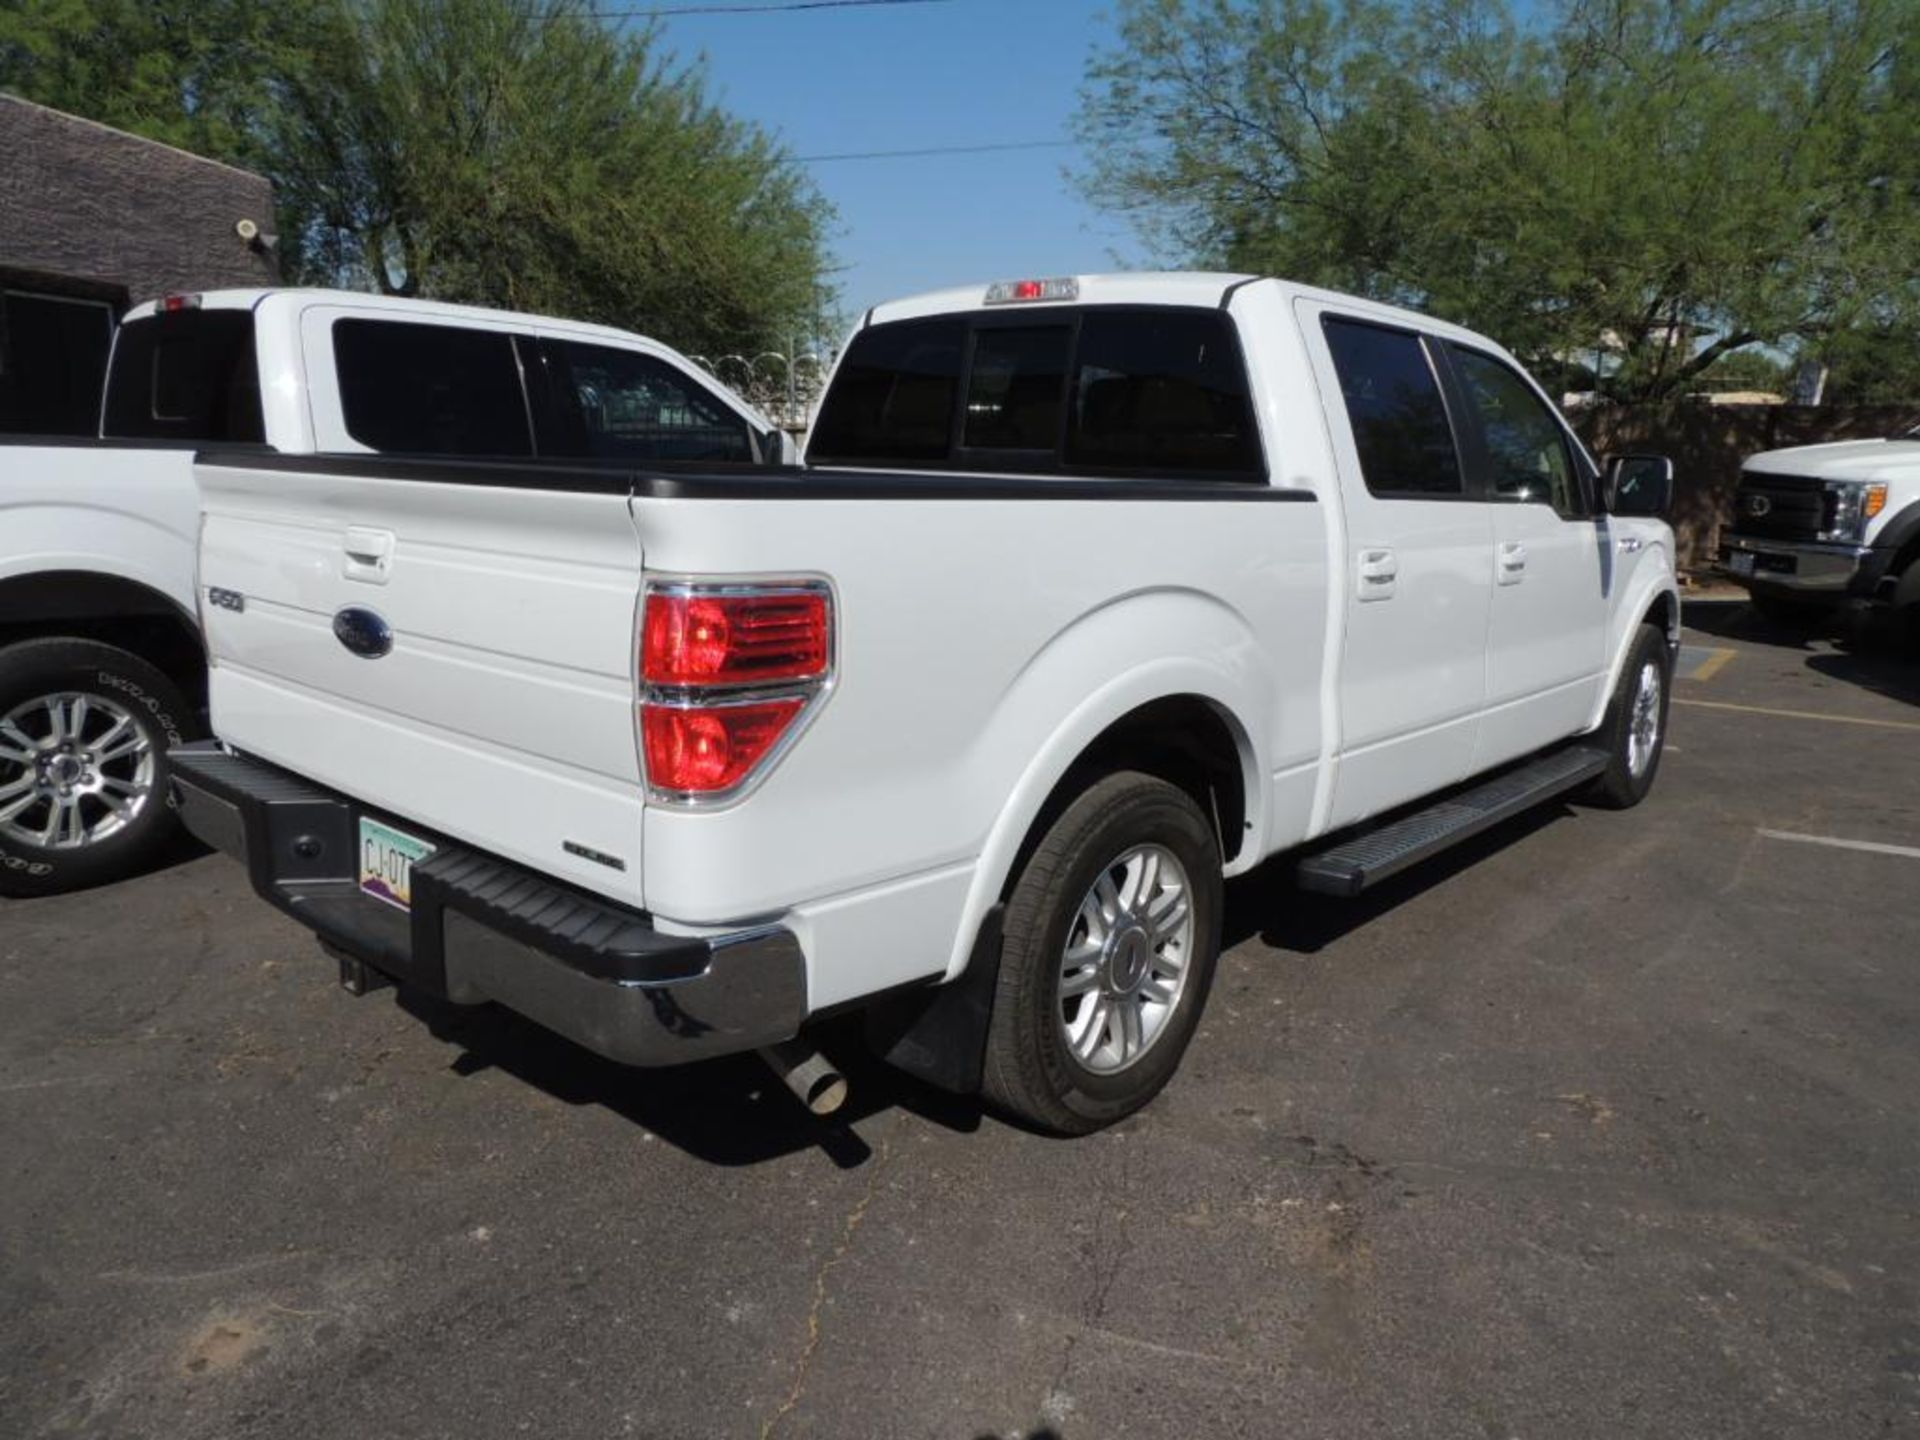 2014 Ford F150 Lariat Crew Cab Shortbed 4x2, VIN # 1FTFW1CF6EKE70611, 5.0 Ltr. Auto Trans, 106992 - Image 3 of 4